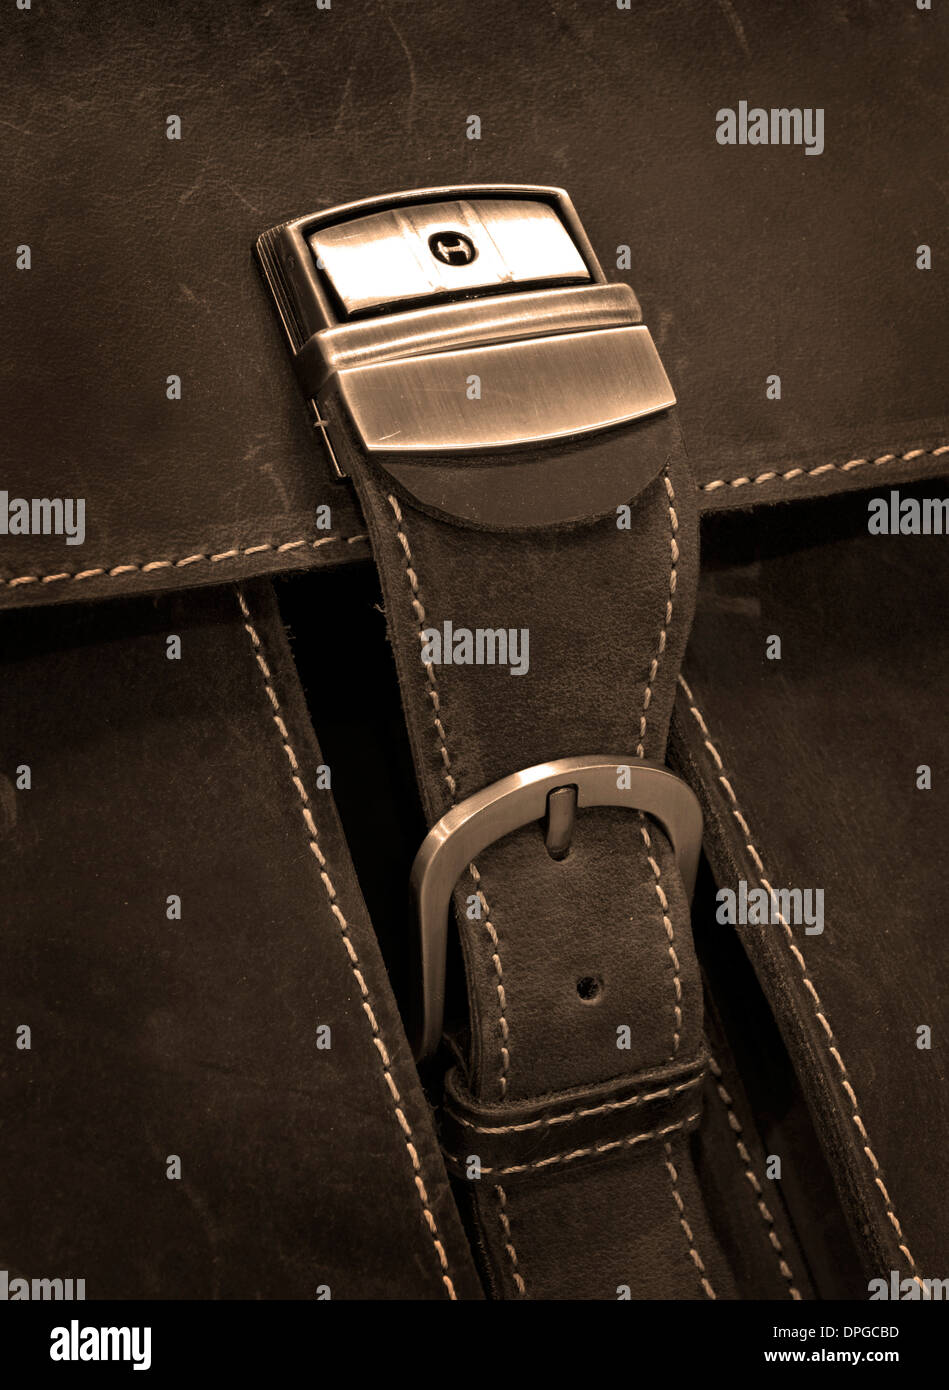 Metal clasp on old leather case with stitching Stock Photo